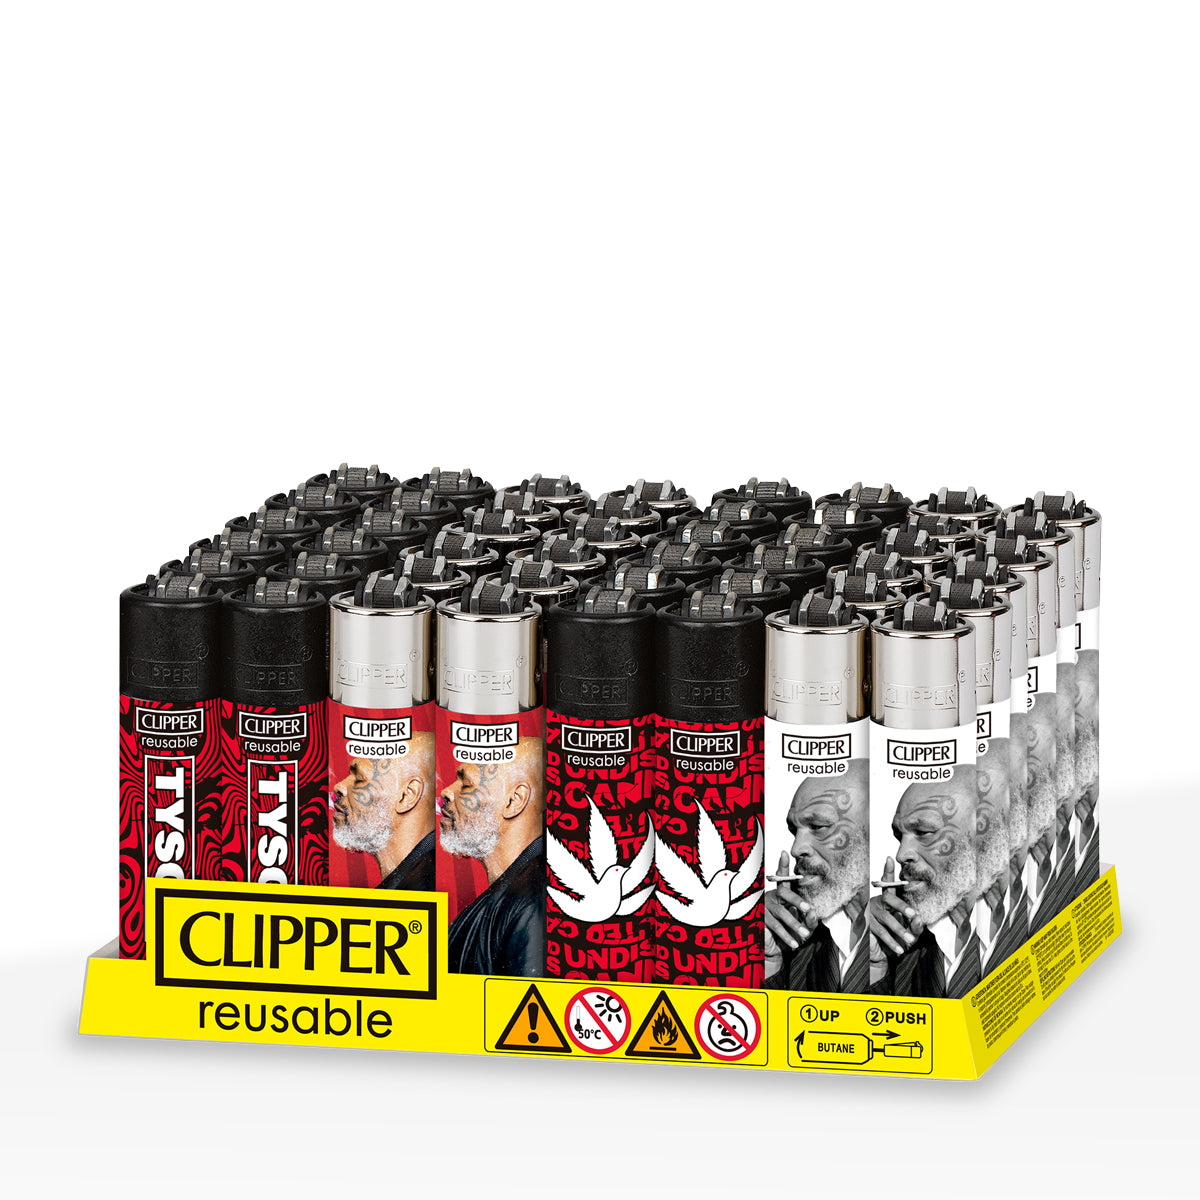 Clipper® | Mike Tyson 'Retail Display' Lighters | 48 Count - Various Styles